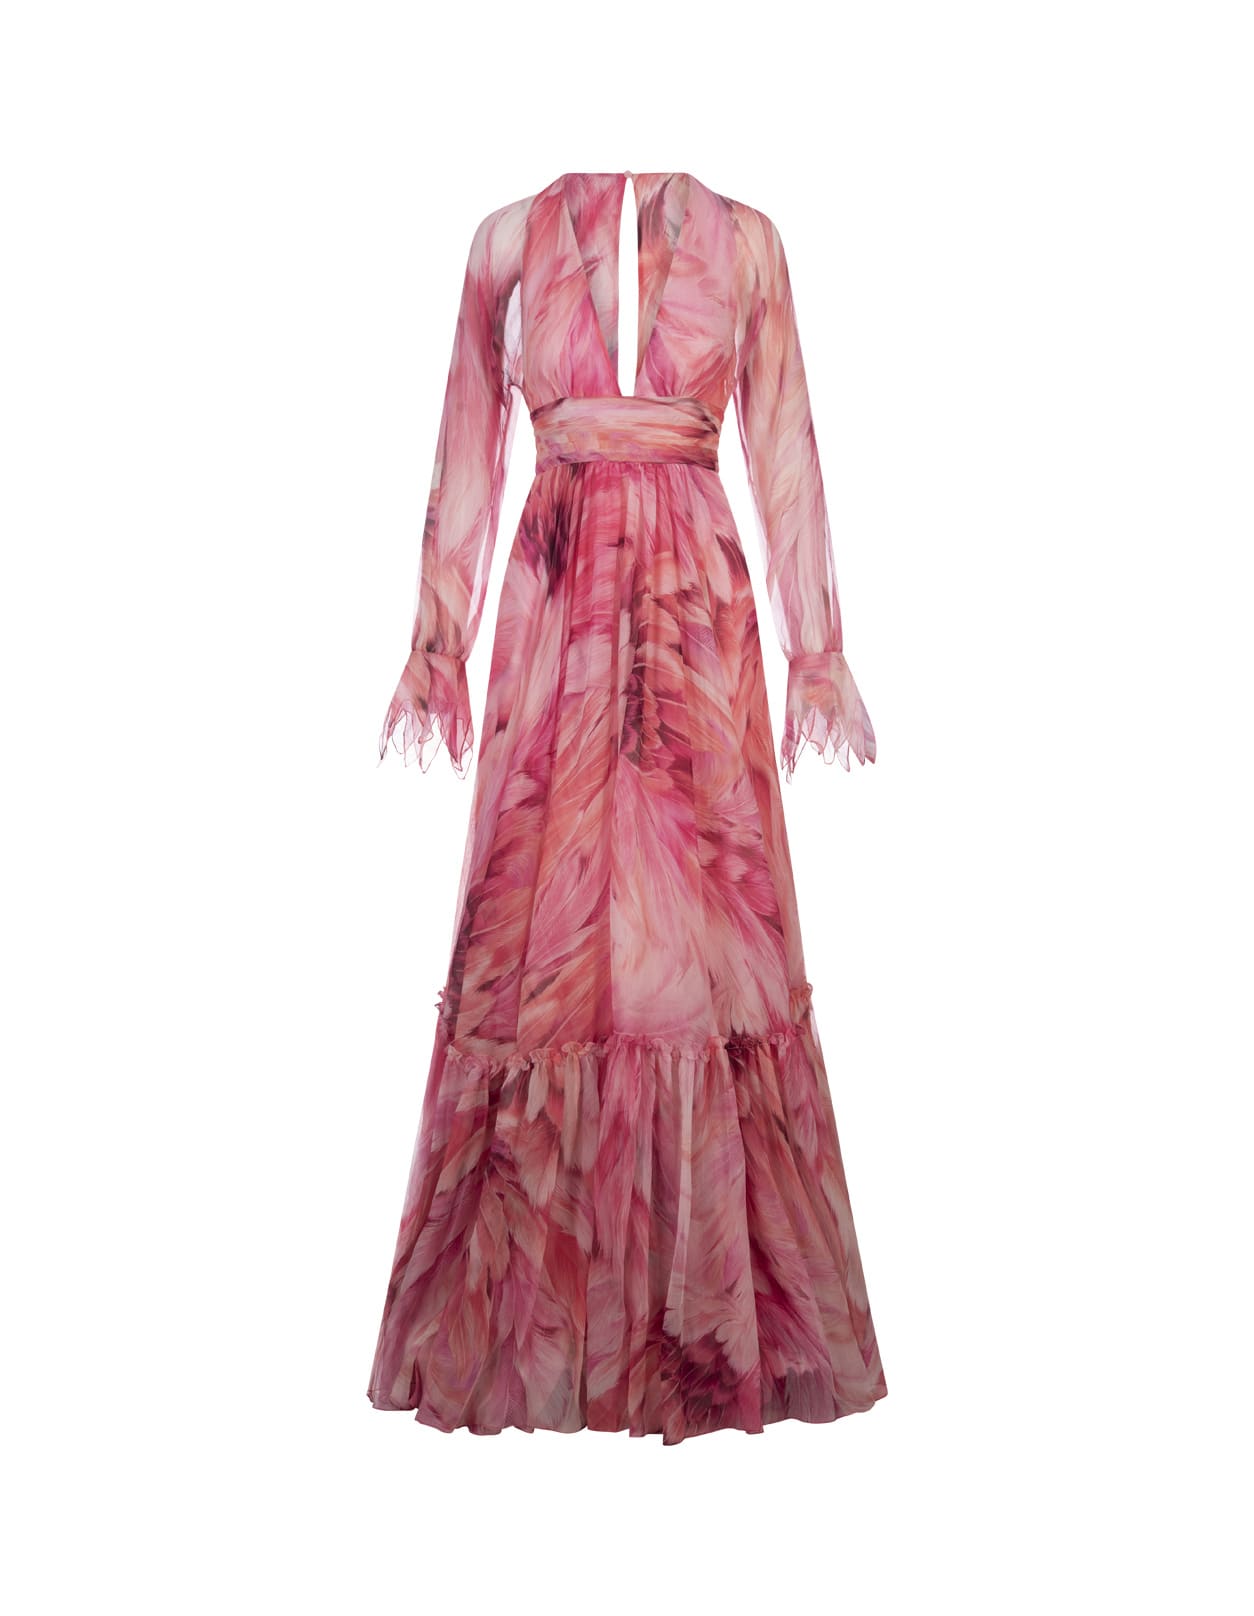 Long Dress With Pink Plumage Print